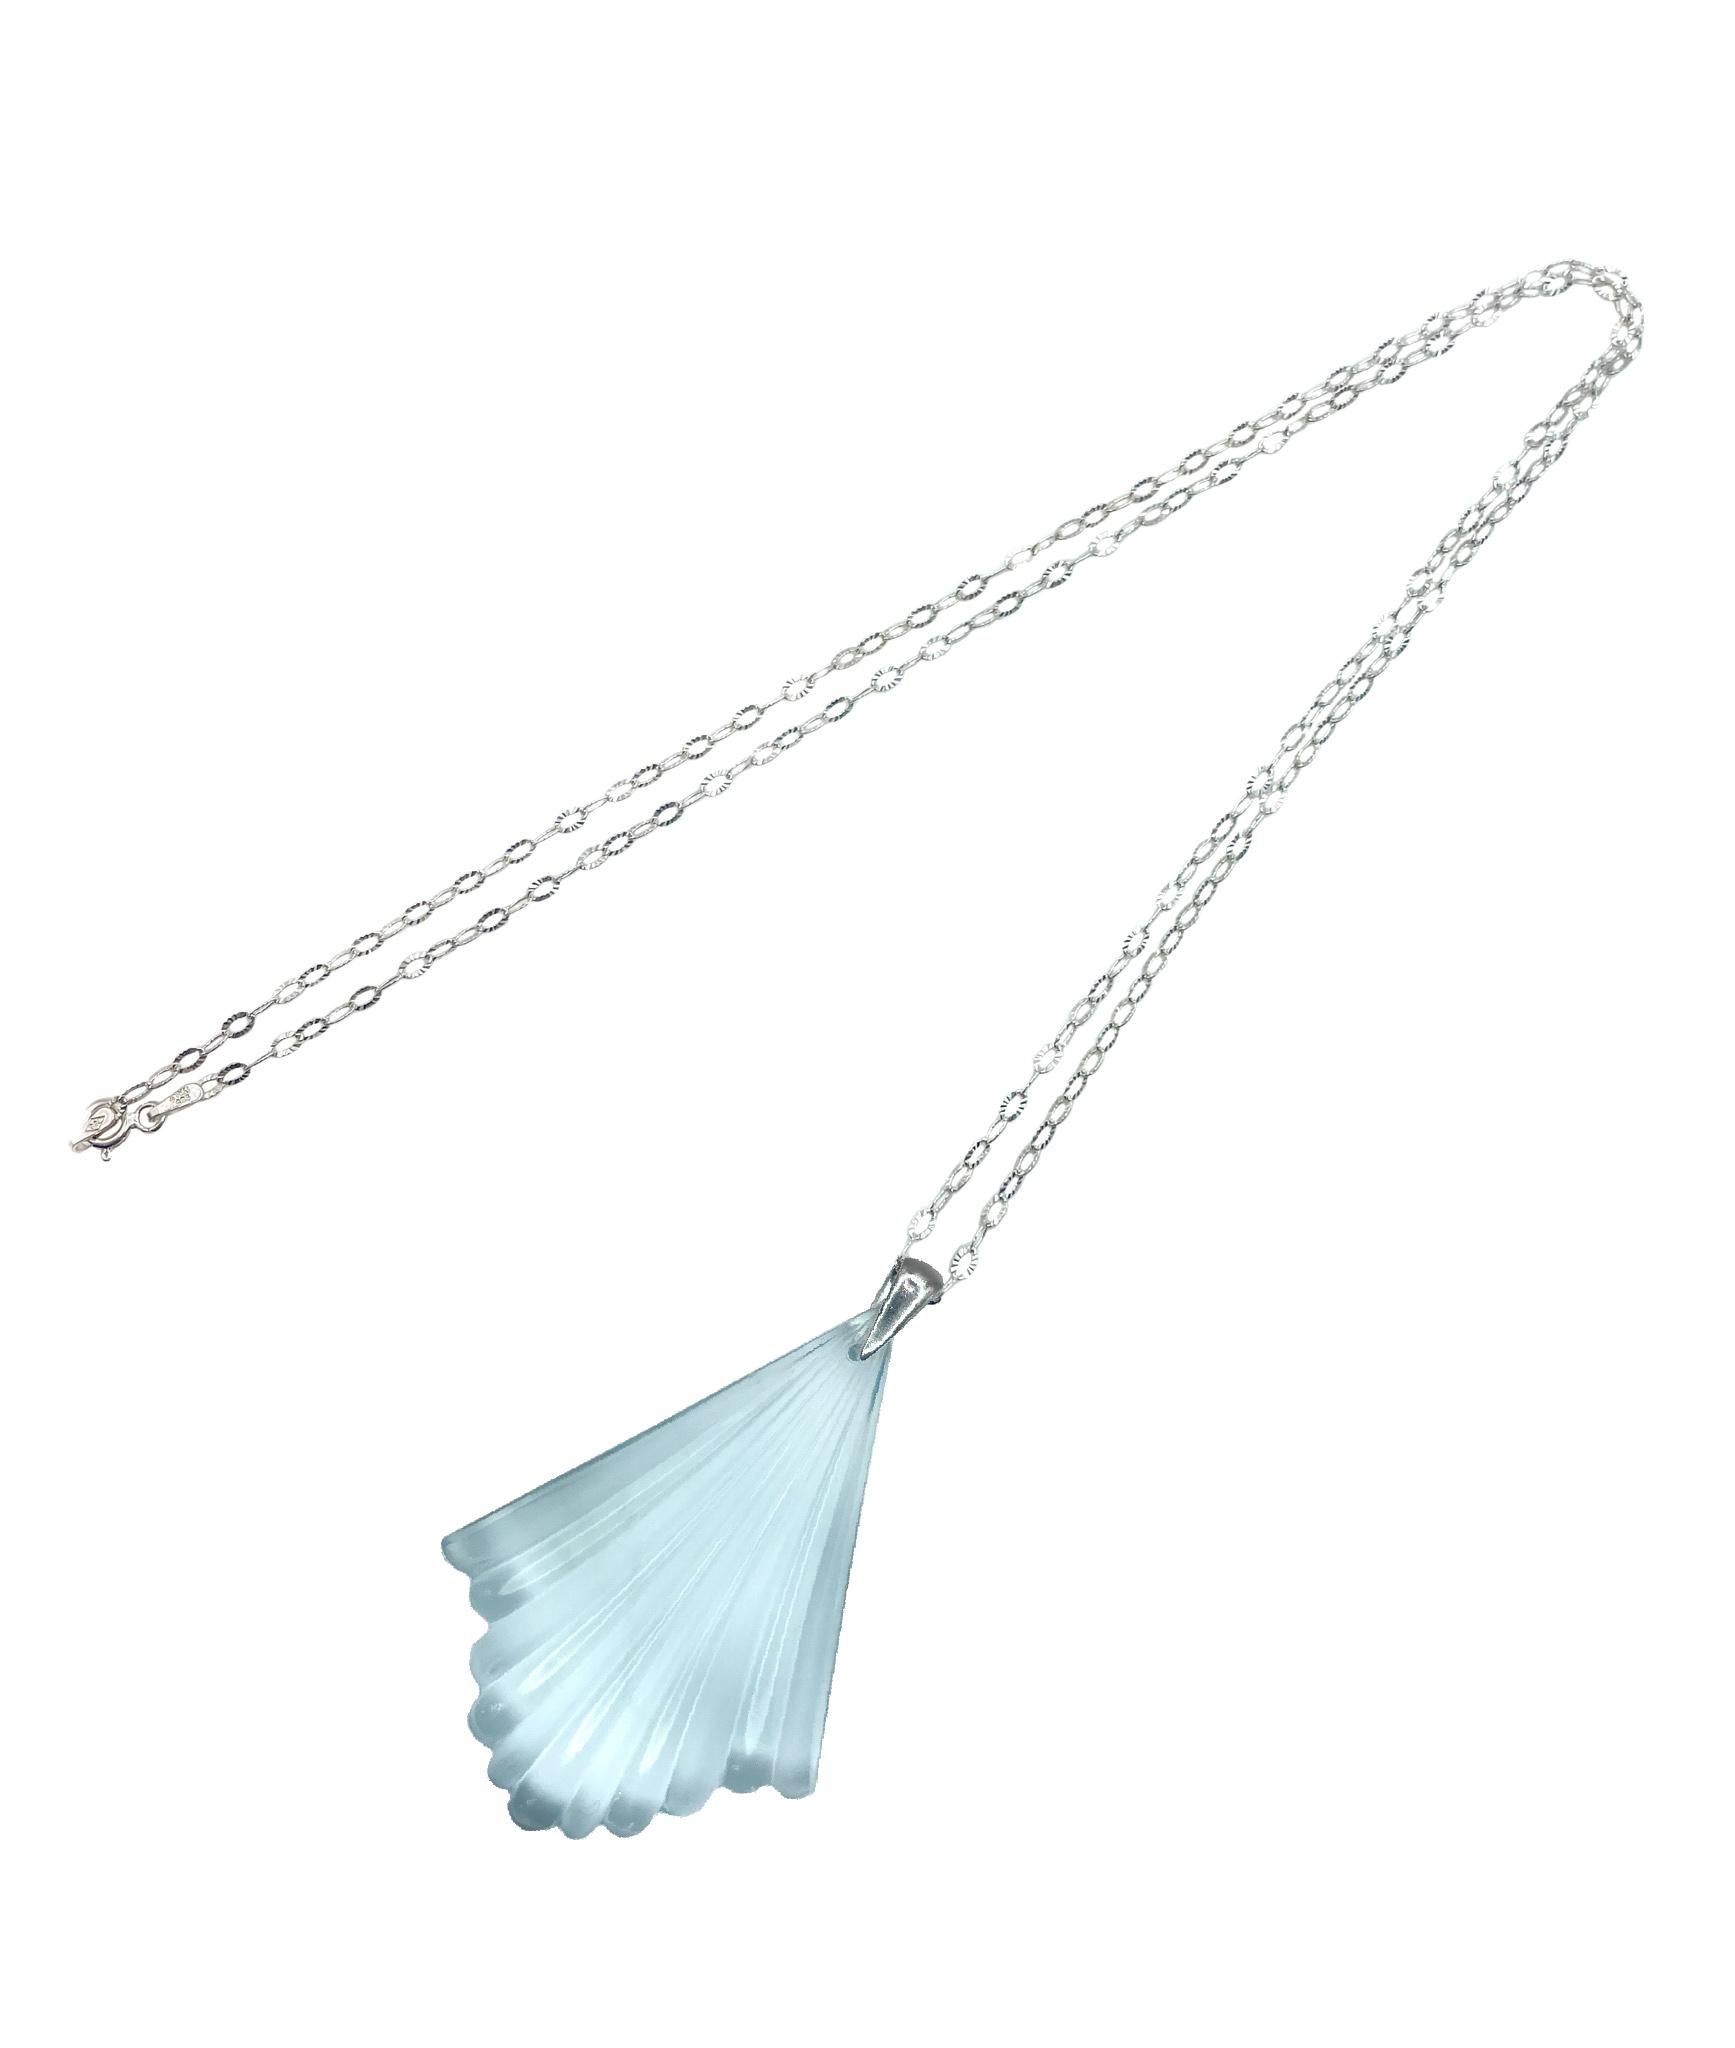 This Art Deco molded transparent aqua glass fan pendant is from 1930s Czech Republic. 

A tribute to the bygone era of the 30's, the Deco fan symbolized power amongst pharaohs and royalty. This classic fan pattern is found in Art Deco architecture,